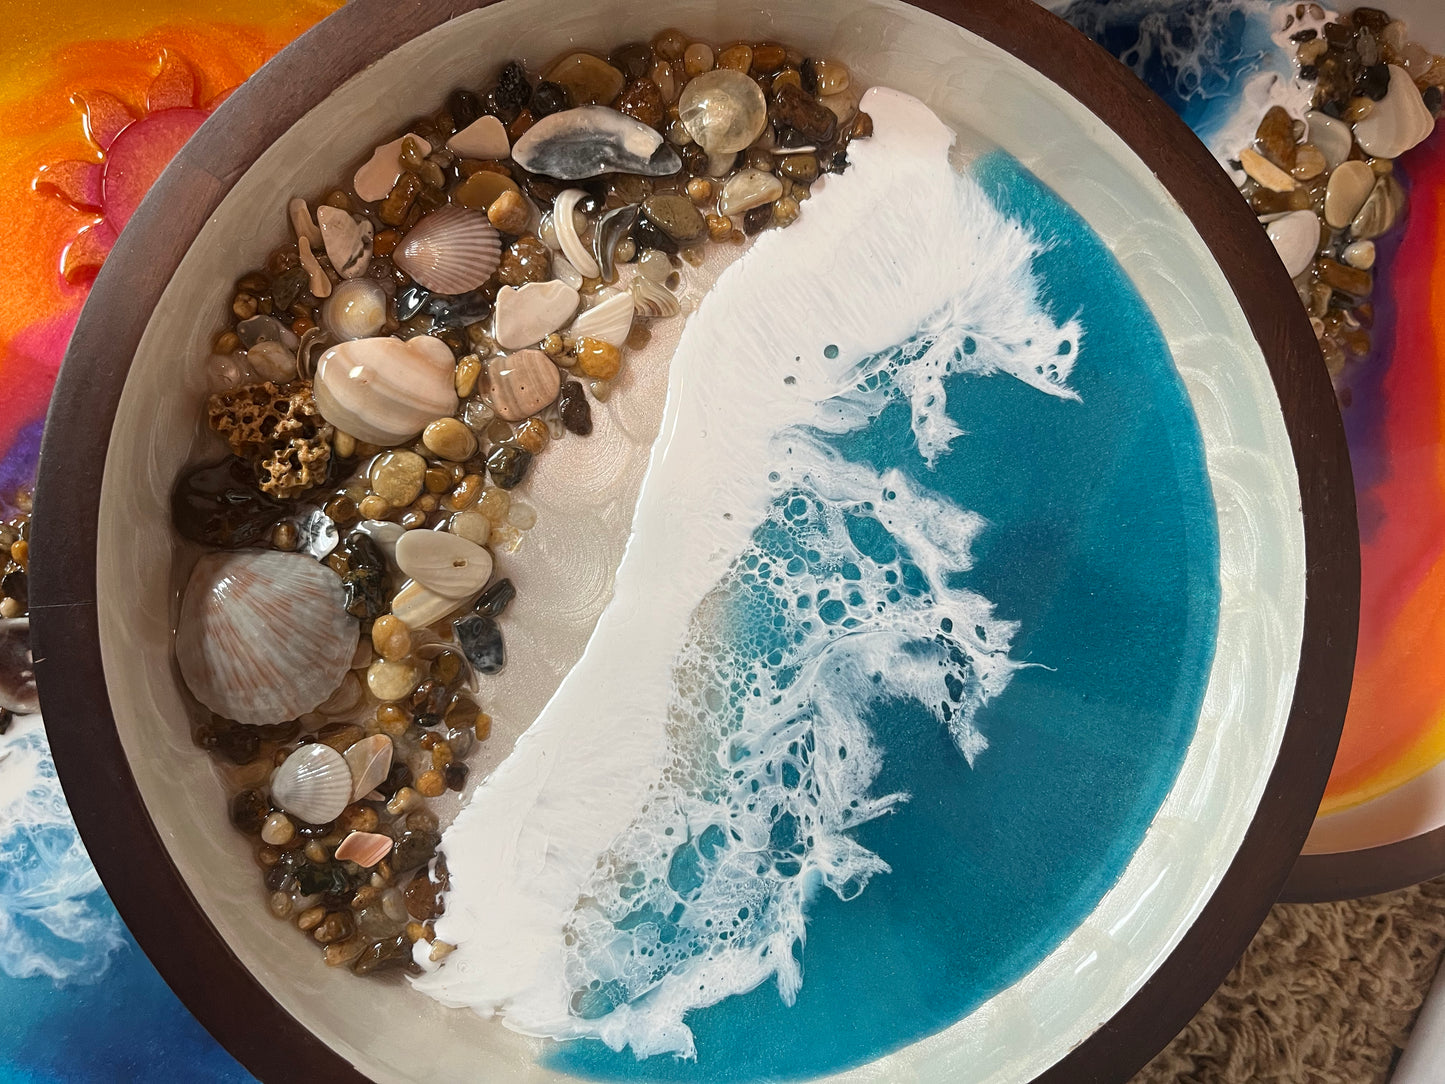 Beautifully decorated resin ocean waves inside this 10" round wooden serving tray, Dark wood with white swirls inside. Top half is pretty Teal Resin Ocean Waves crashing on real Outer Banks North Carolina sea shells. Collected from beaches on the OBX.  By Fyre Art Studio Kill Devil Hills NC OBX Resin Artist